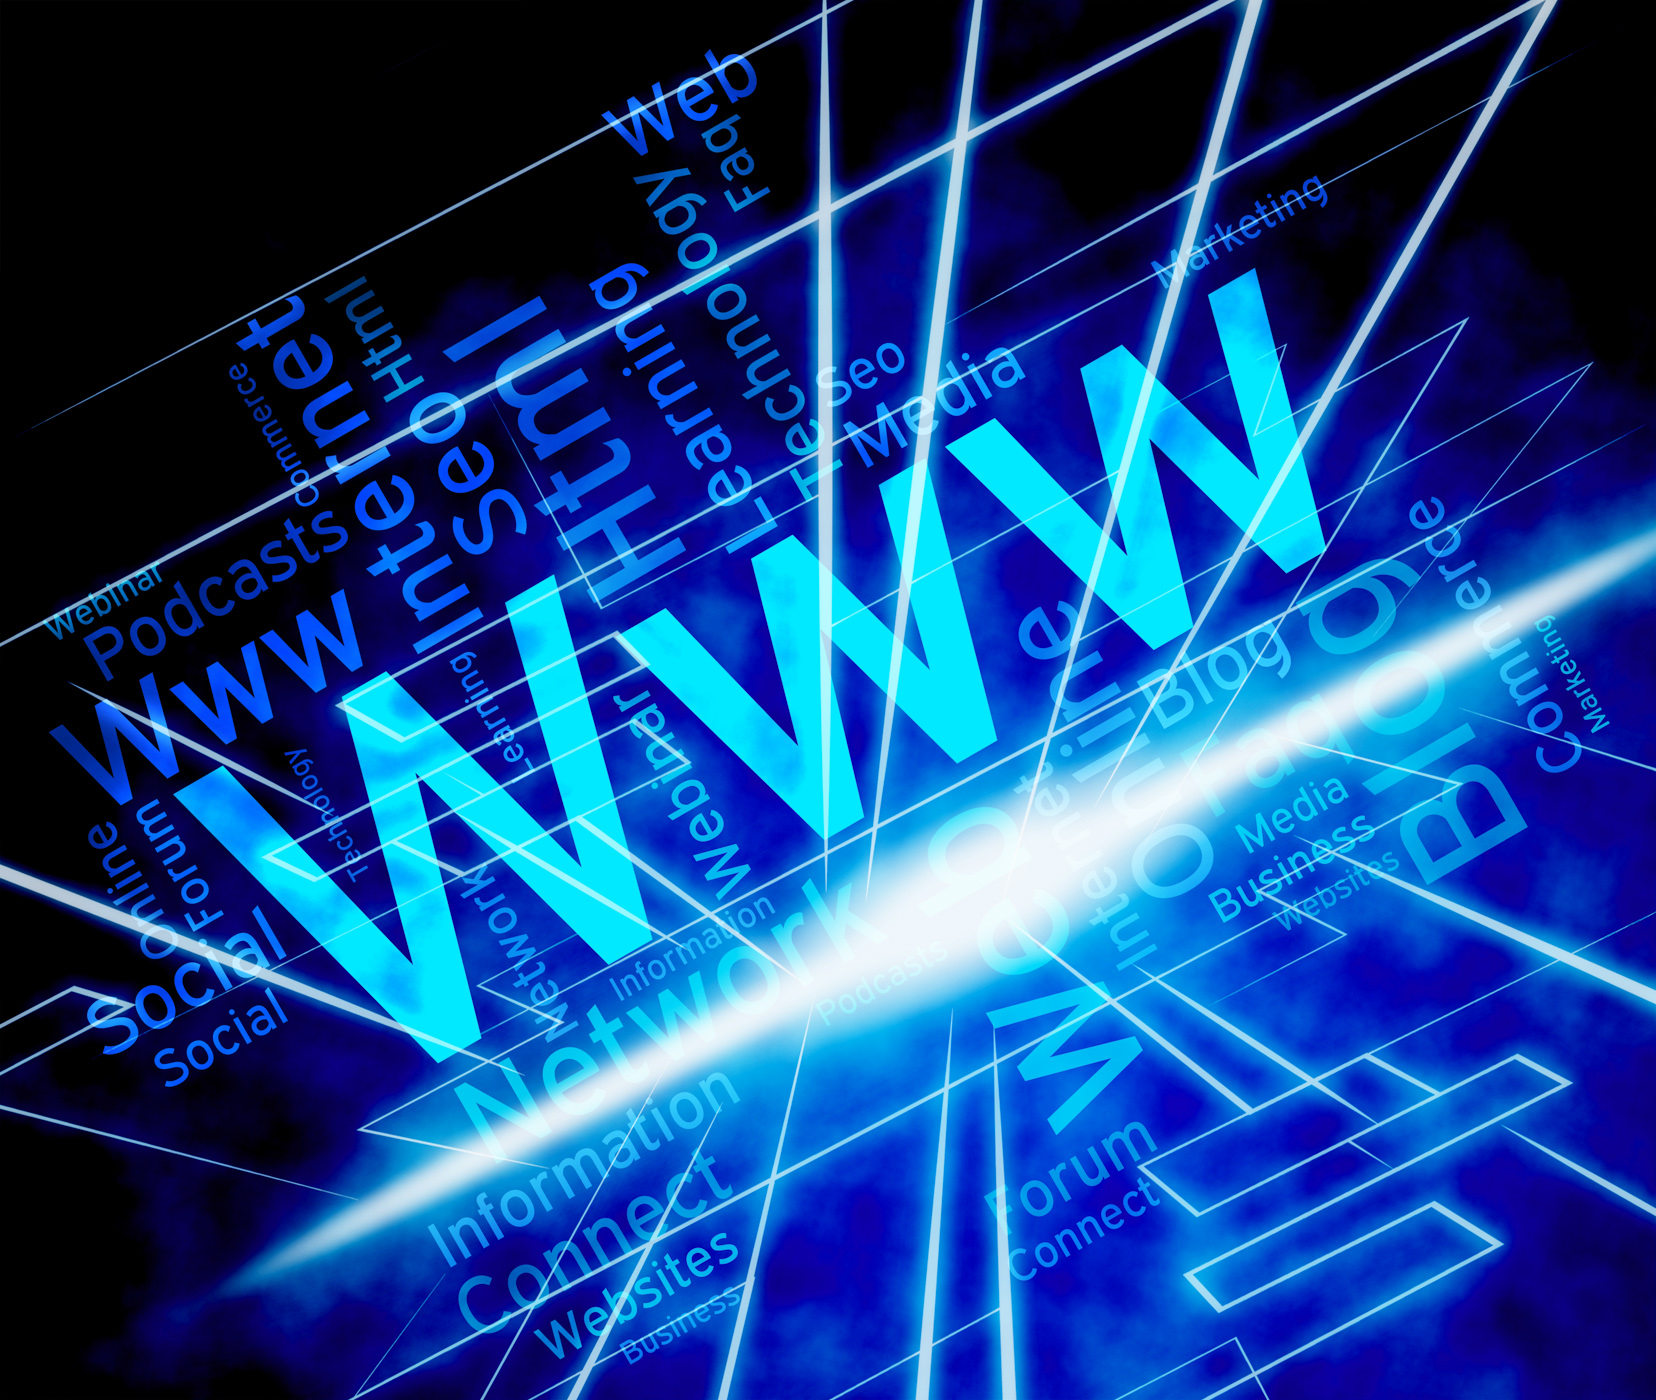 Www word means world wide web and internet photo